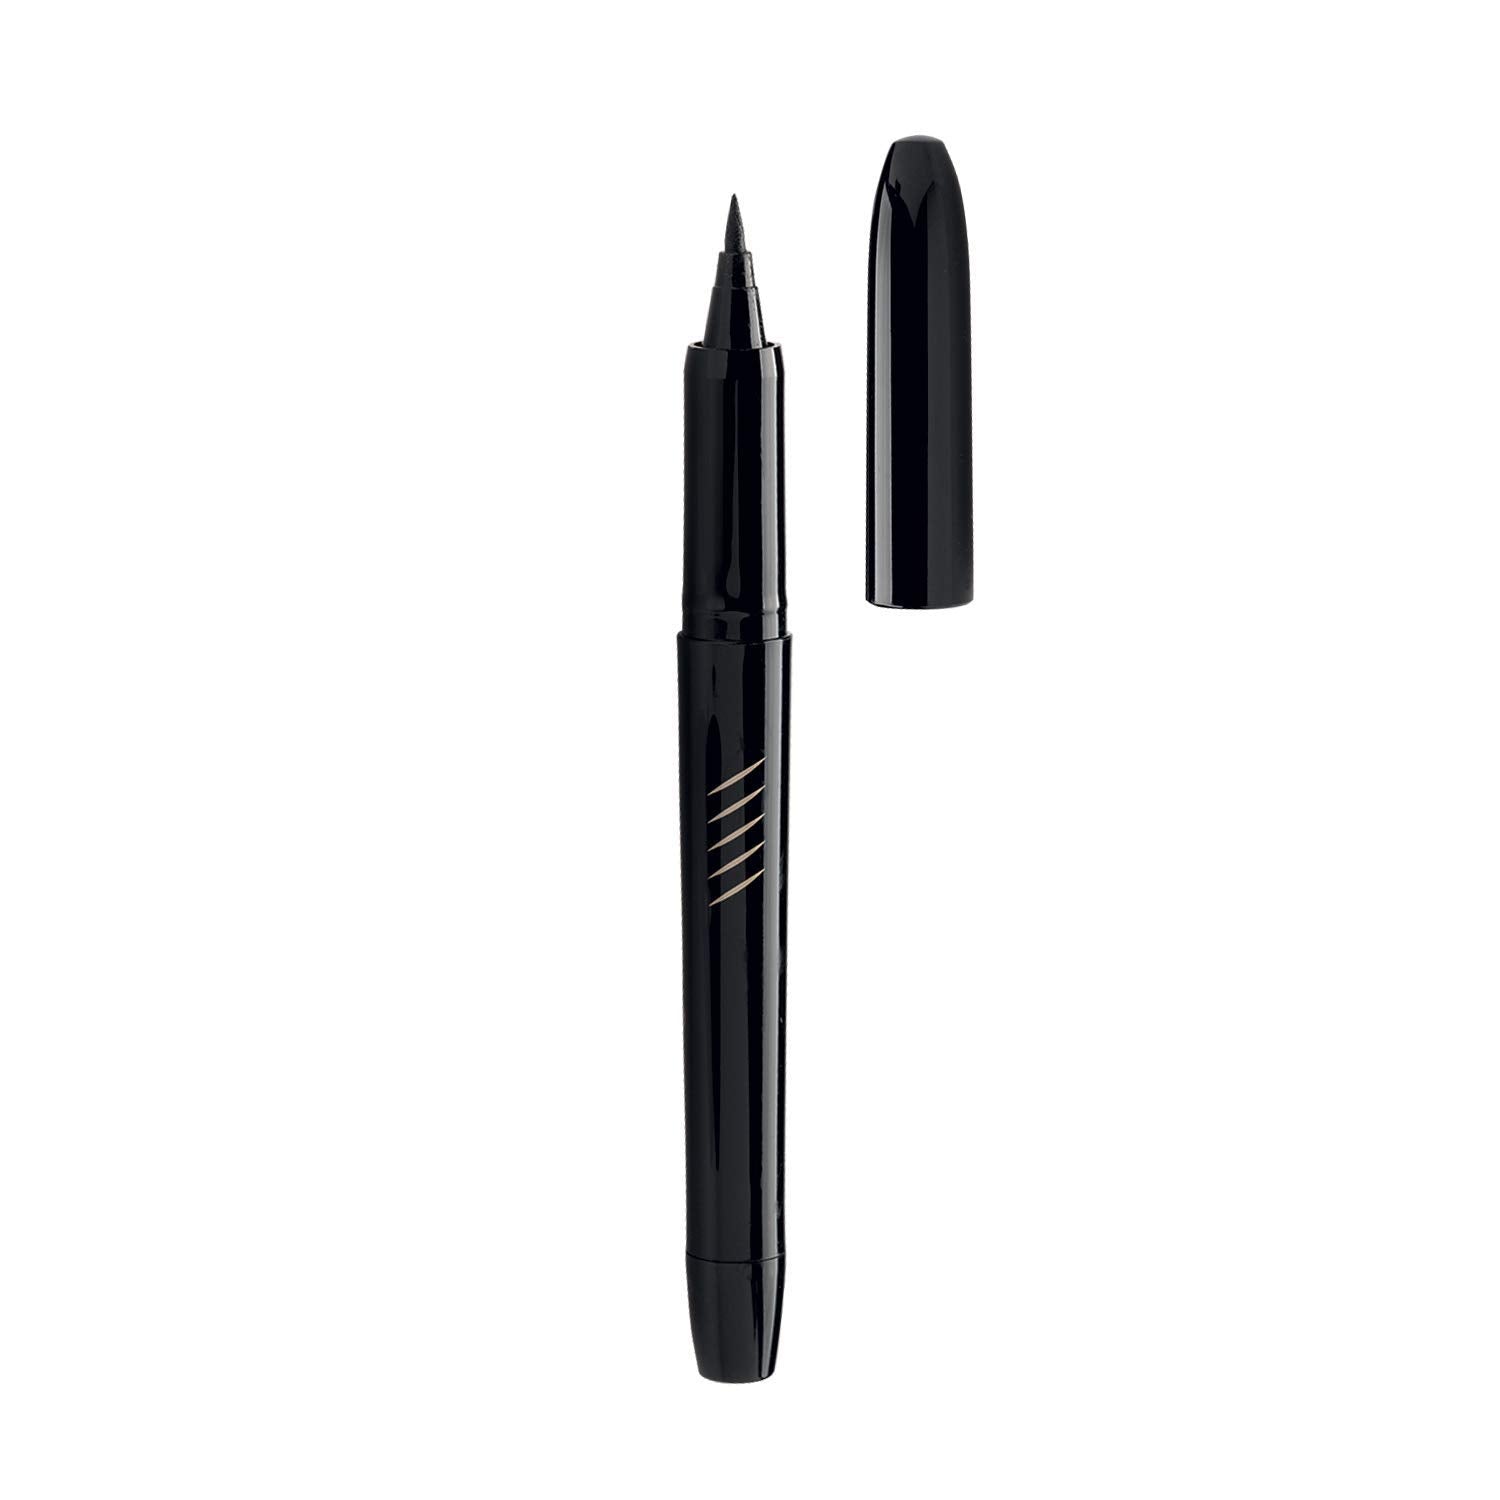 Radiant Professional Lineproof Eye Line - Pen Eyeliner with exible Tip Pen for a Long Lasting and Precise Outline - Smudge-Proof, Waterproof Liquid Black Eyeliner For Intense Black Color- 0.034